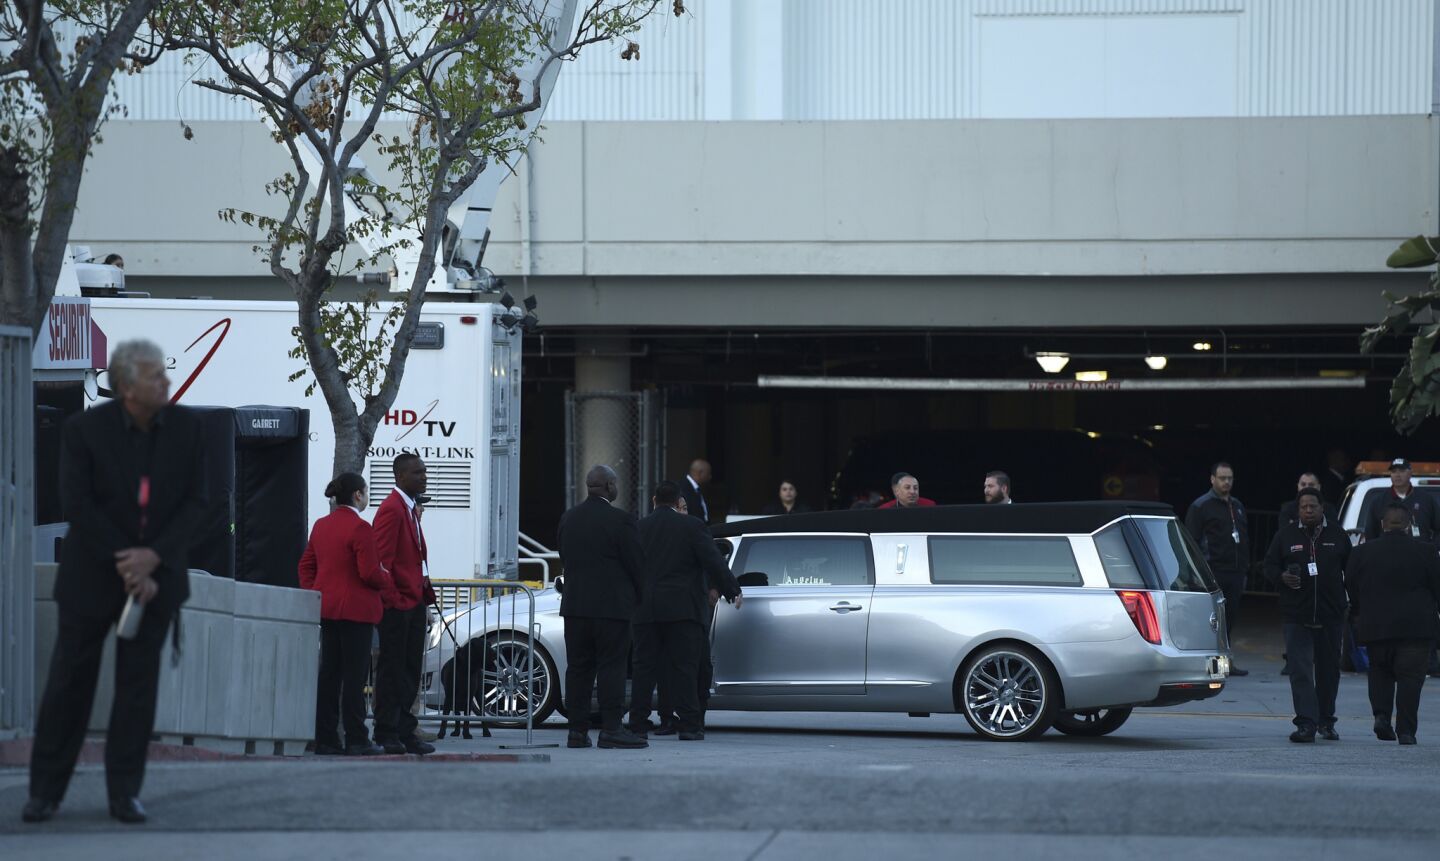 A silver hearse arrives at Staples Center for the memorial service for rapper Nipsey Hussle, whose given name was Ermias Asghedom.